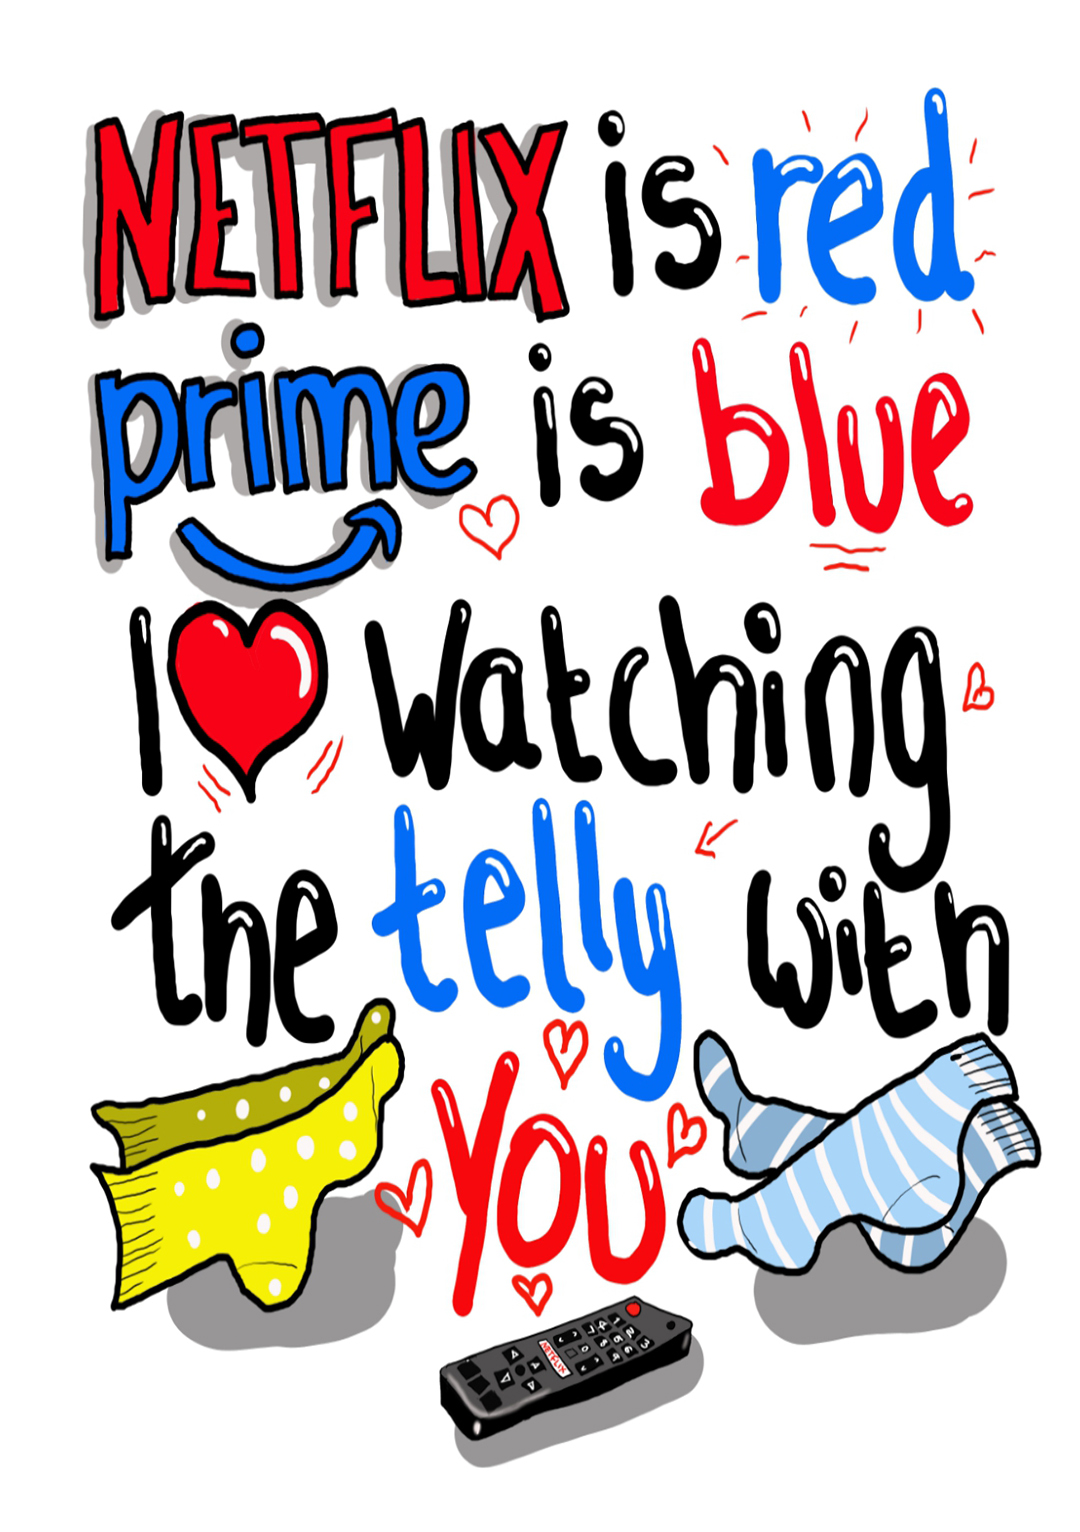 Love Watching Telly With You - Valentines Day Card